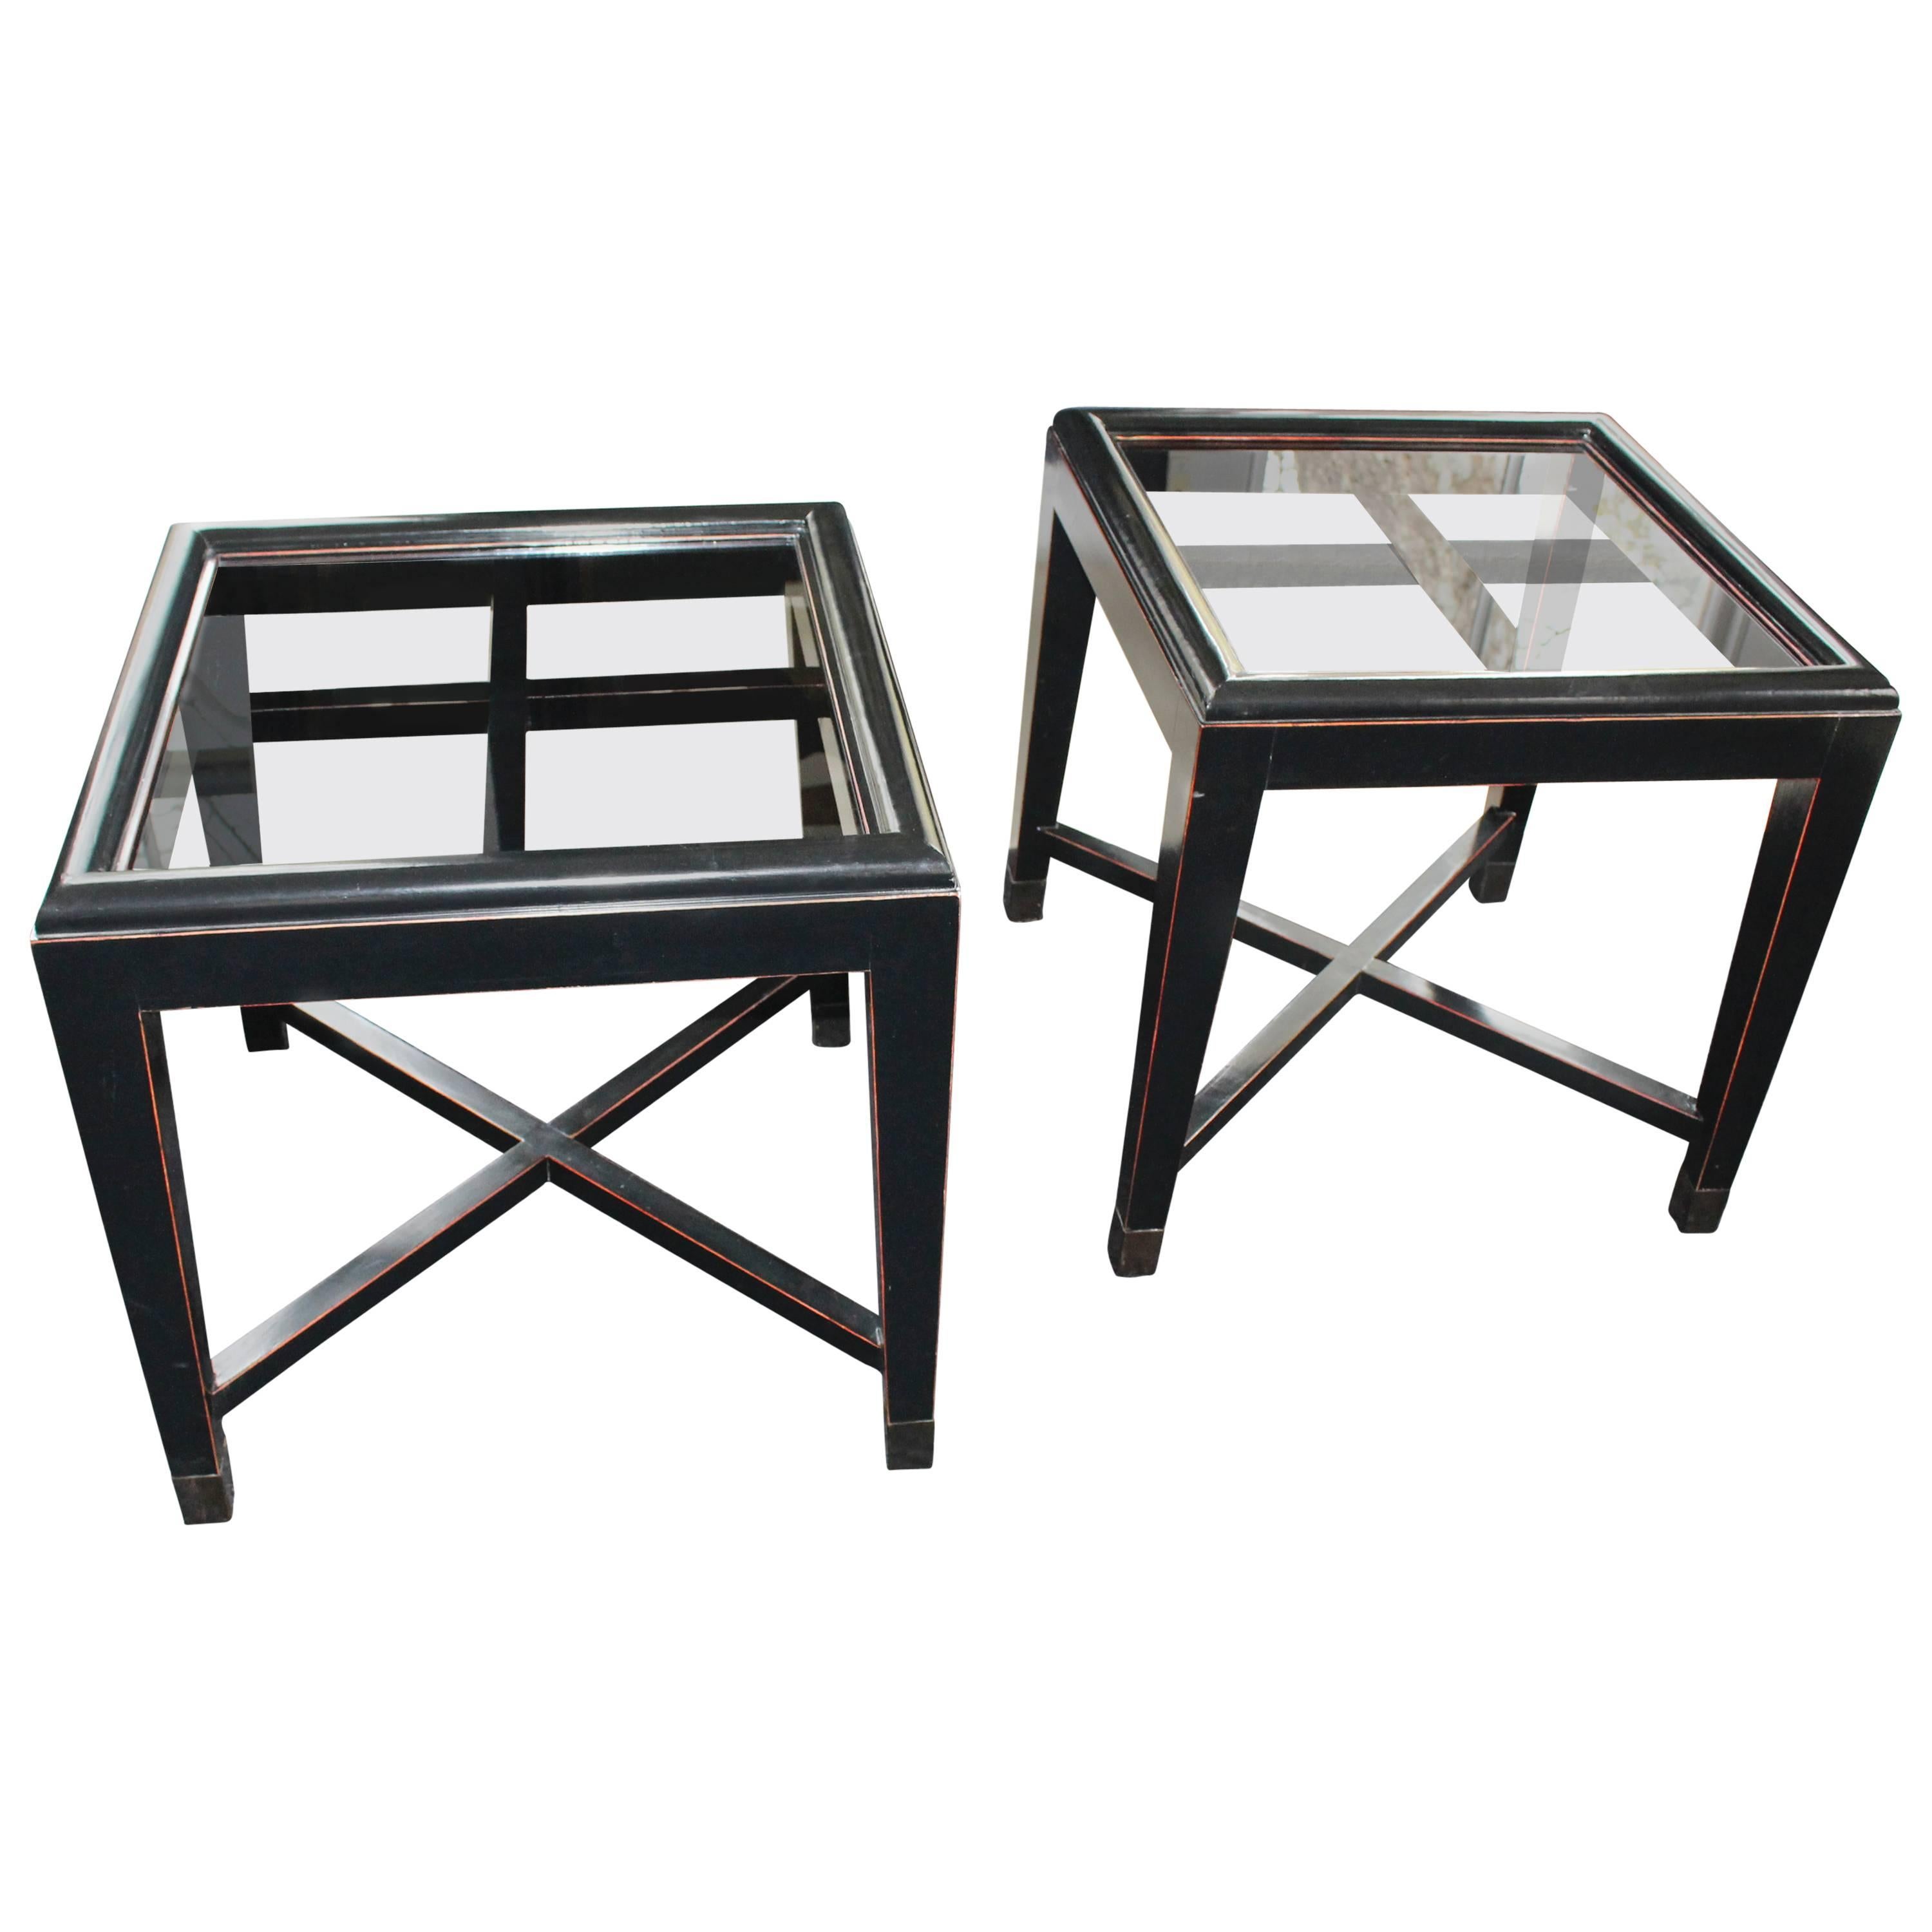 Pair of Vintage Ebonized Asian-Inspired Tables